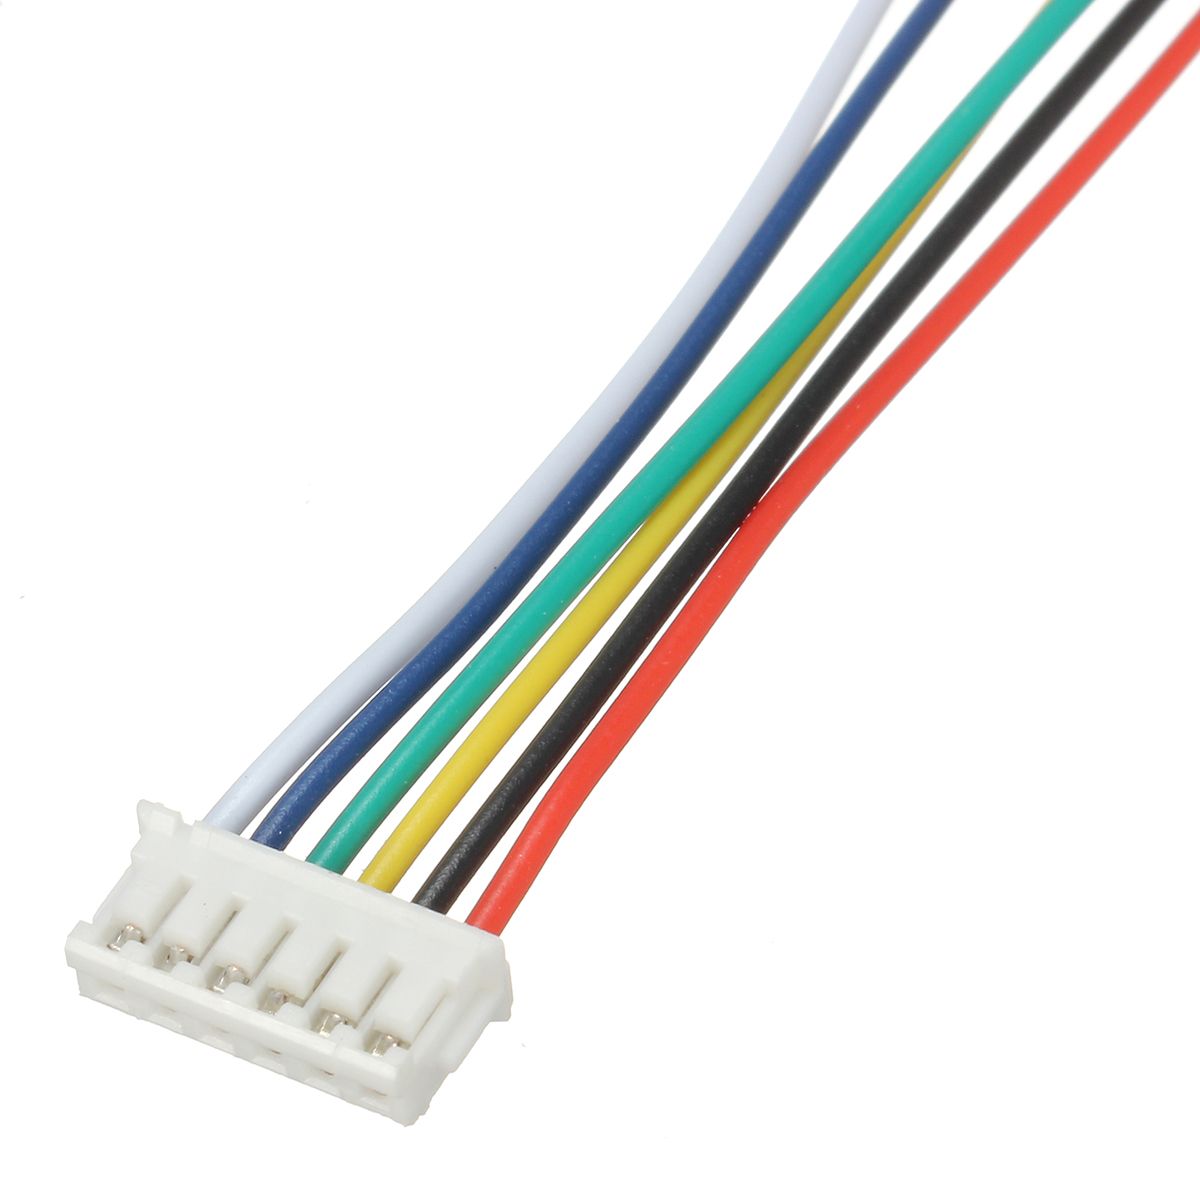 Connector JST micro 1.25mm pitch 6-pin male met 10cm kabel